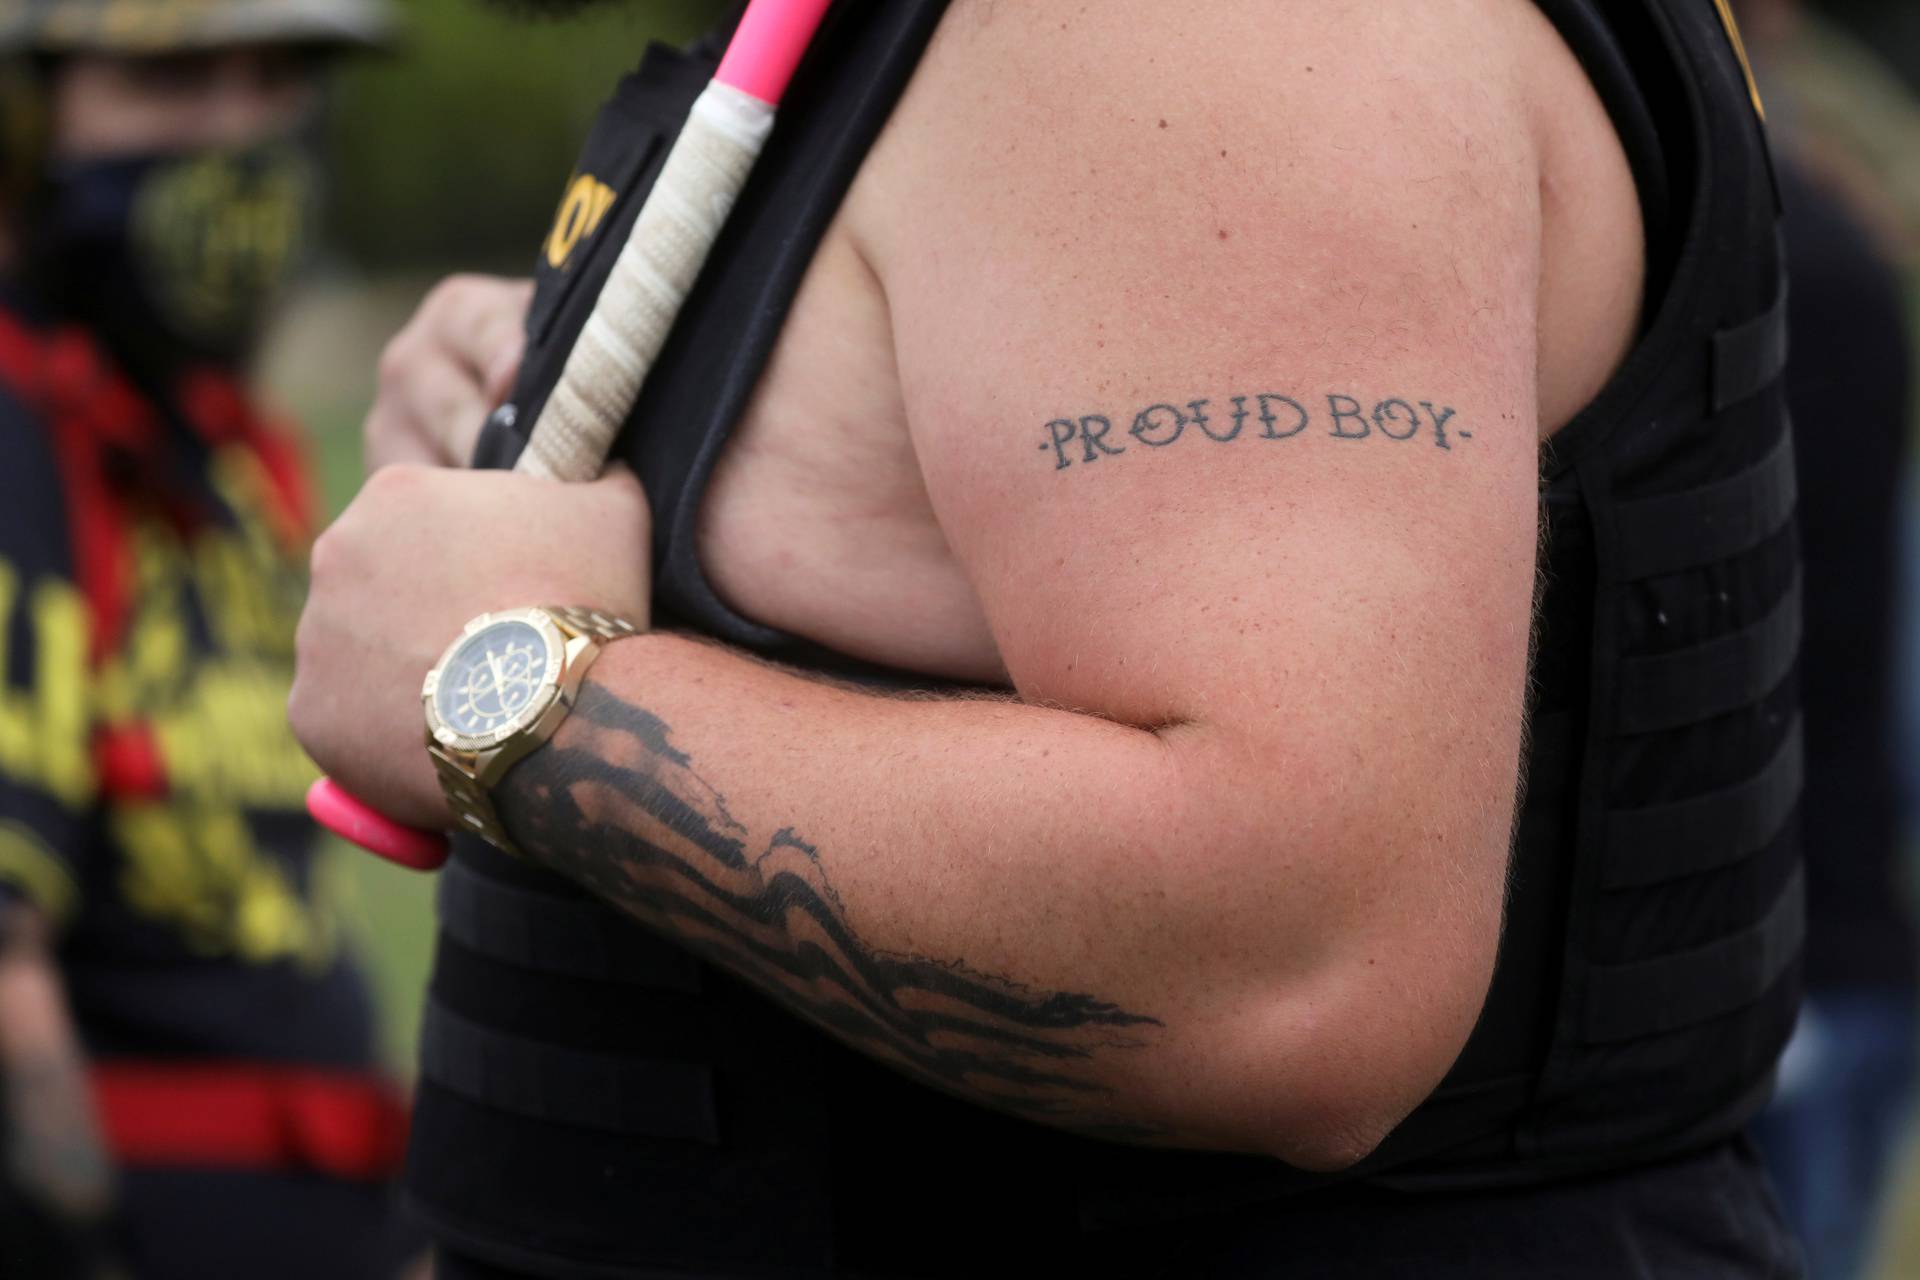 A tattoo is seen on a person's arm as people gather for a rally of the far right group Proud Boys, in Portland